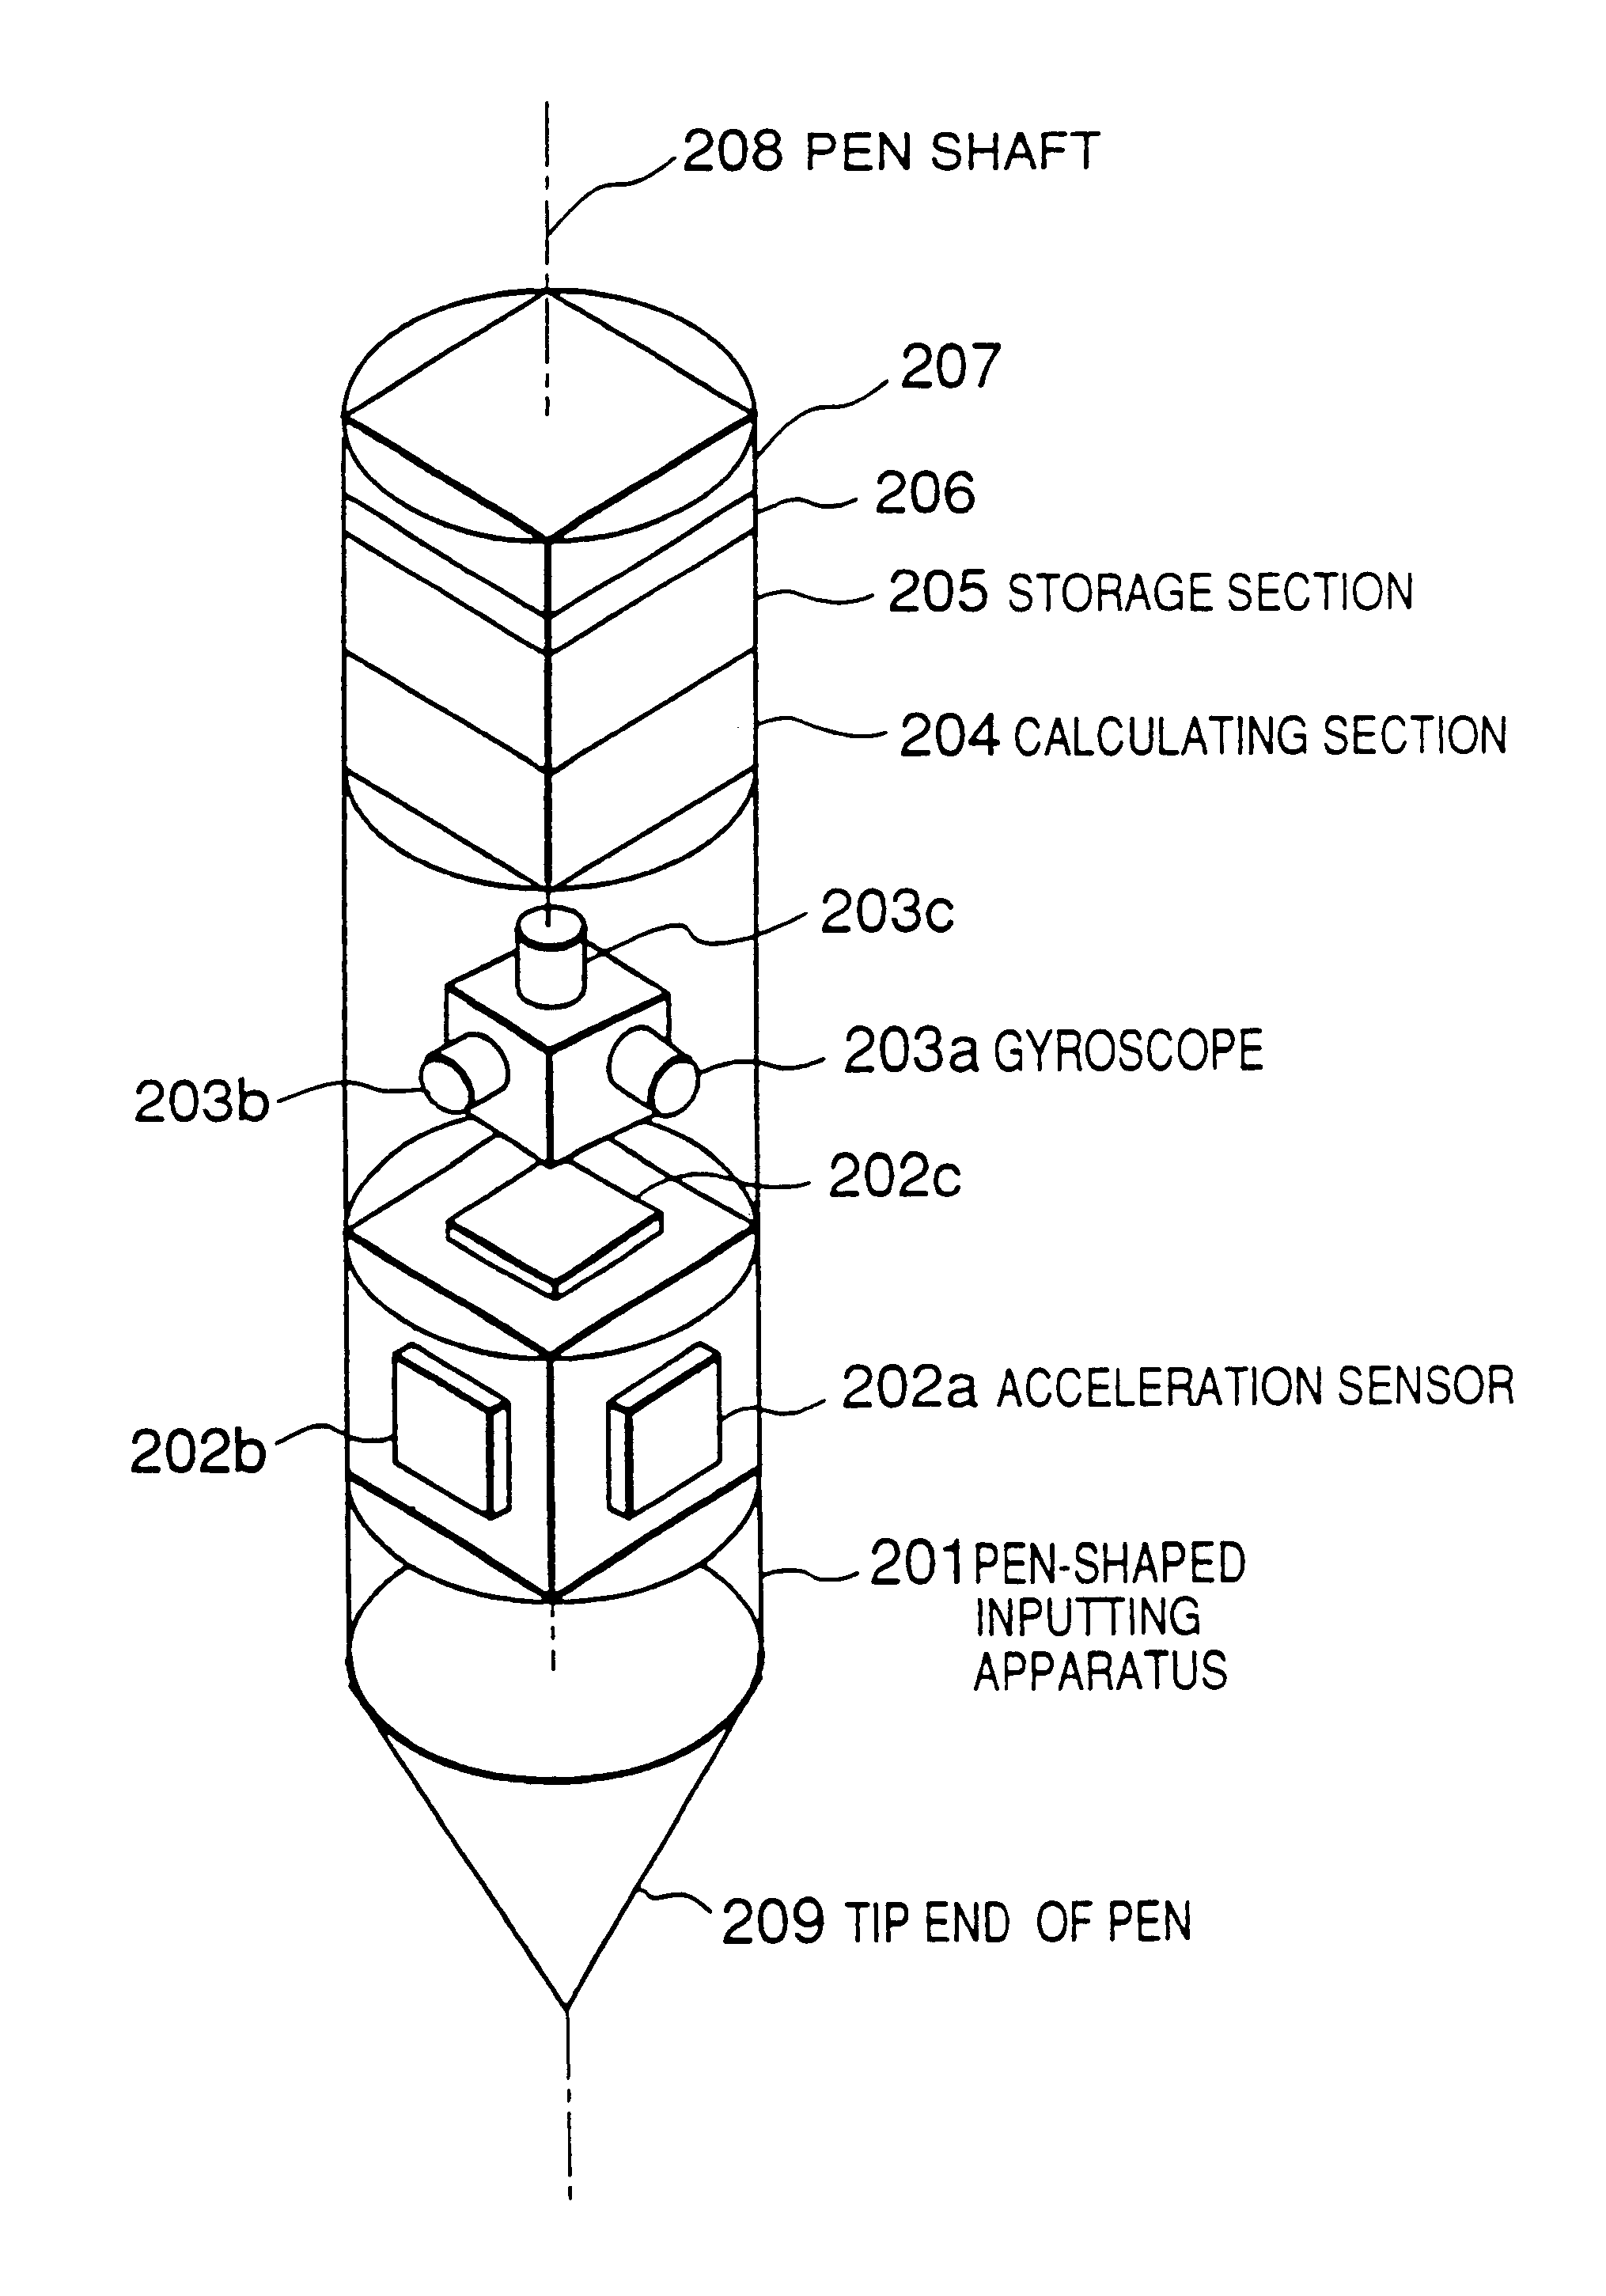 Pen-shaped handwriting input apparatus using accelerometers and gyroscopes and an associated operational device for determining pen movement